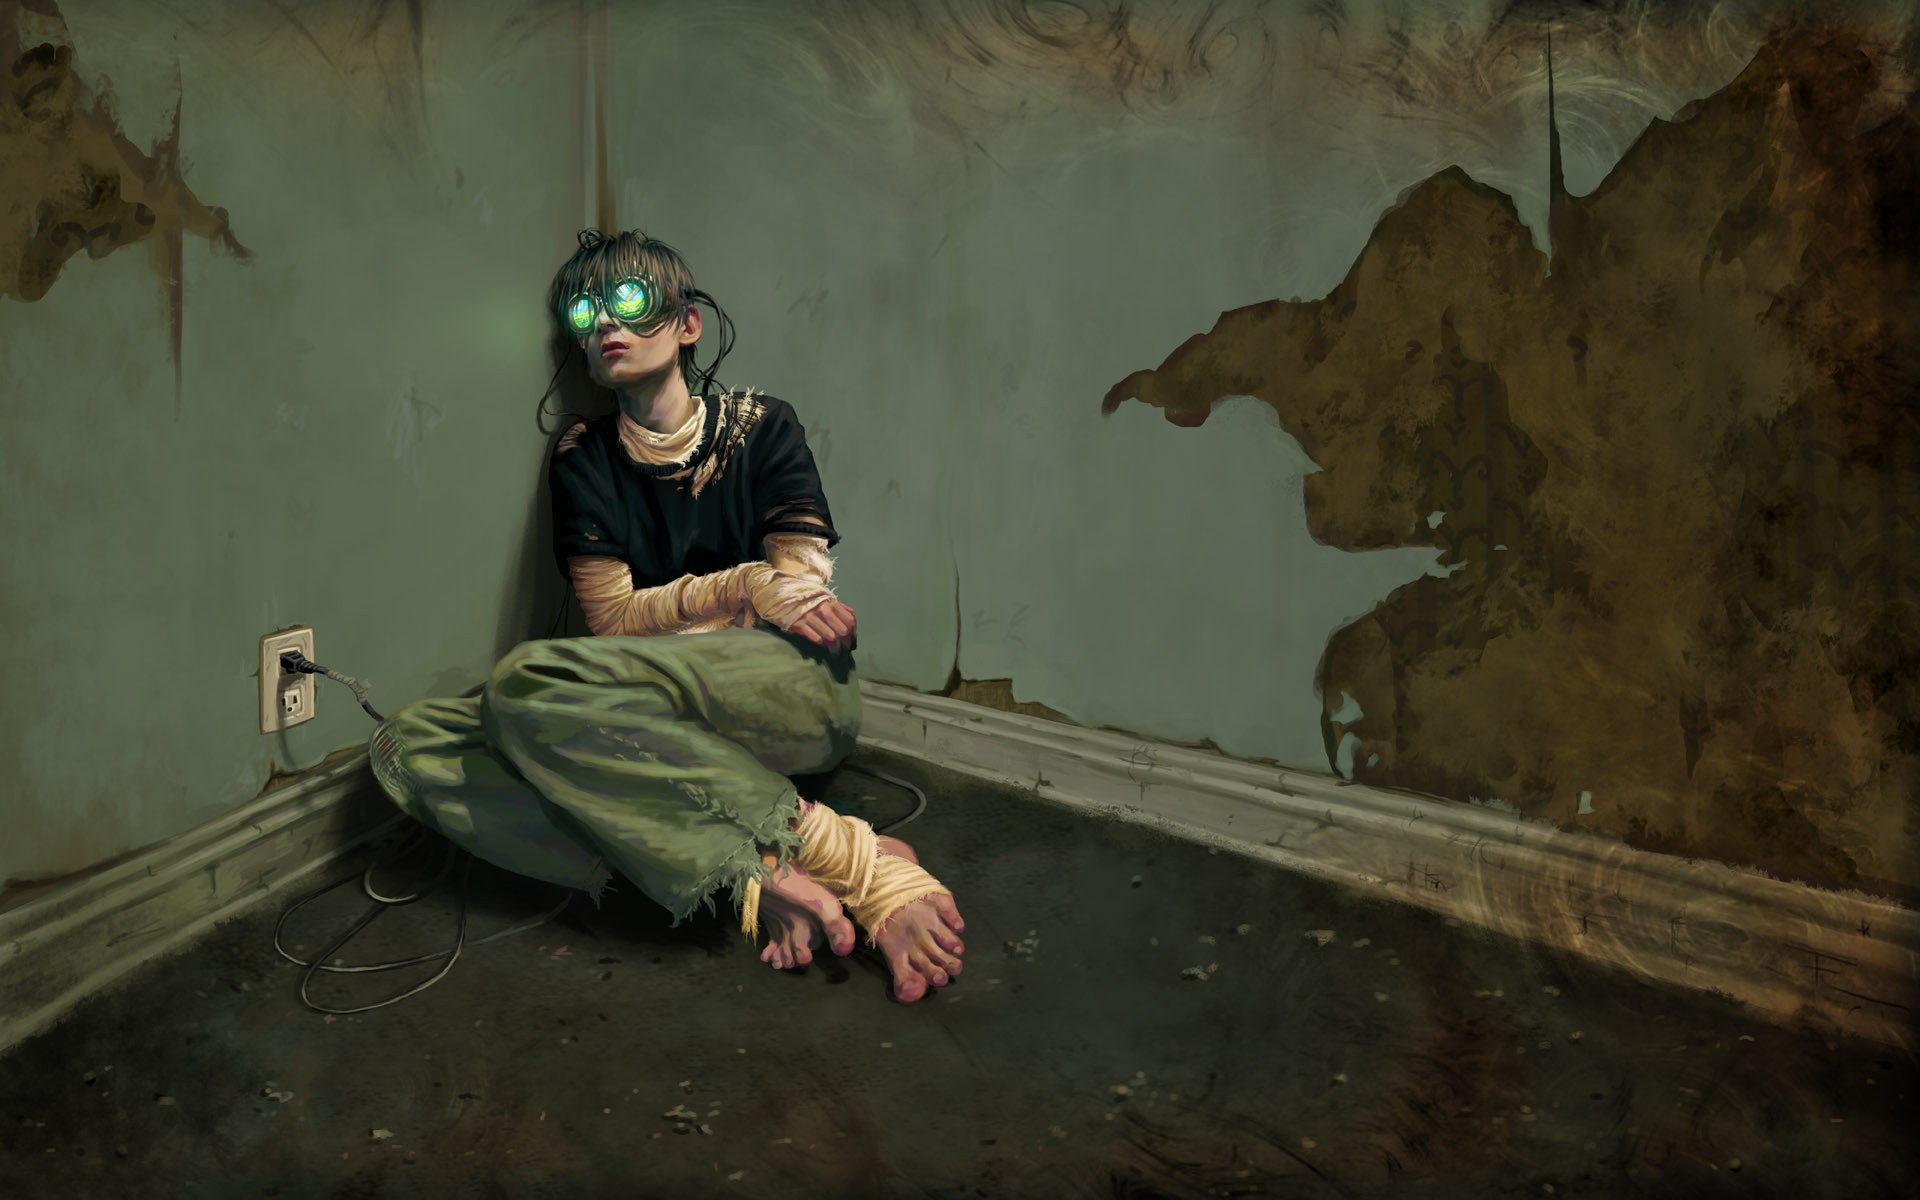 General 1920x1200 goggles bandages torn clothes futuristic science fiction alone indoors on the floor artwork virtual reality